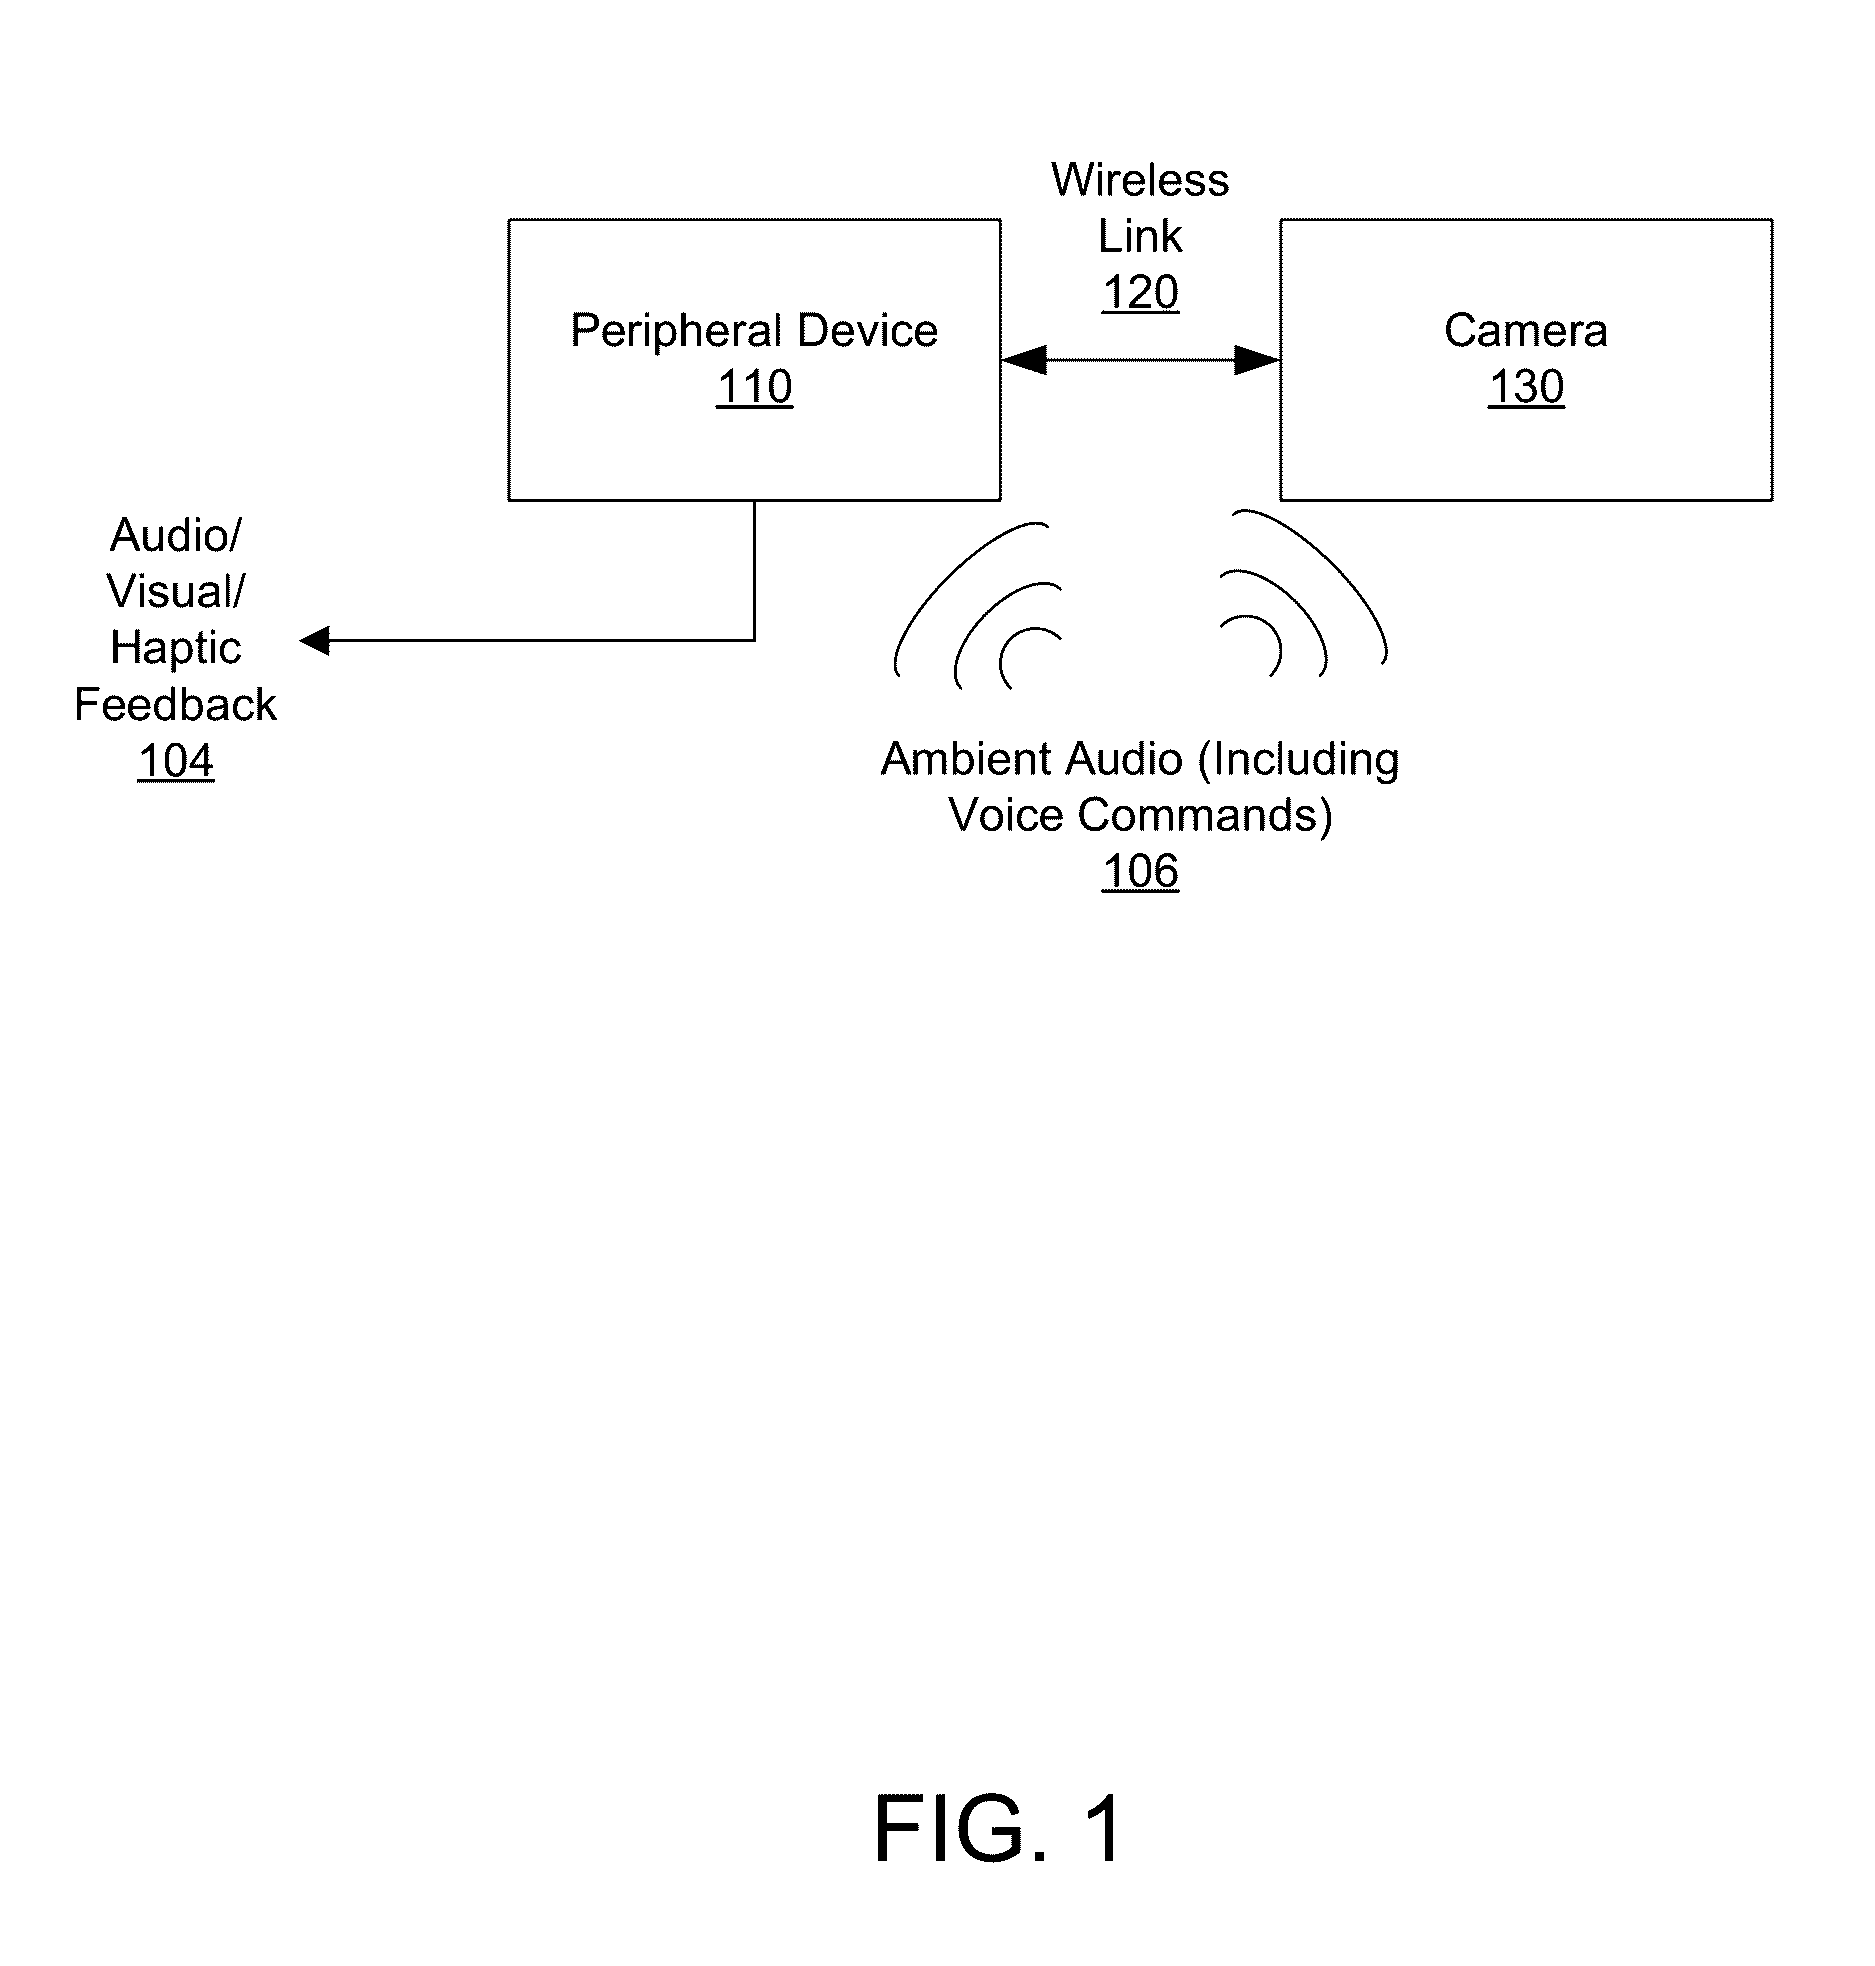 Camera Peripheral Device for Supplemental Audio Capture and Remote Control of Camera